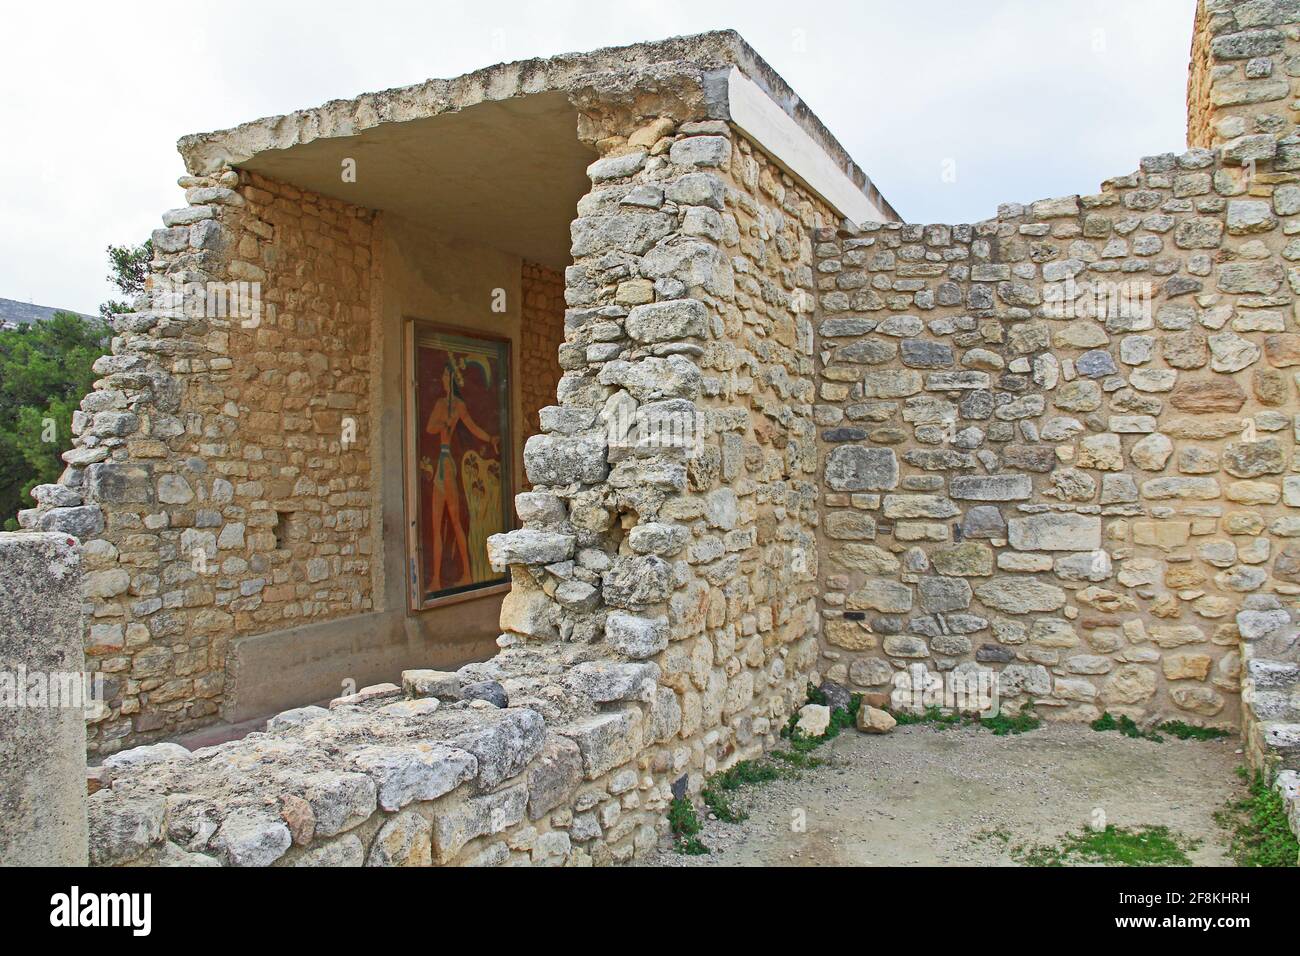 Corridor of the Procession in the Palace of Knossos on Crete, Greece Stock Photo